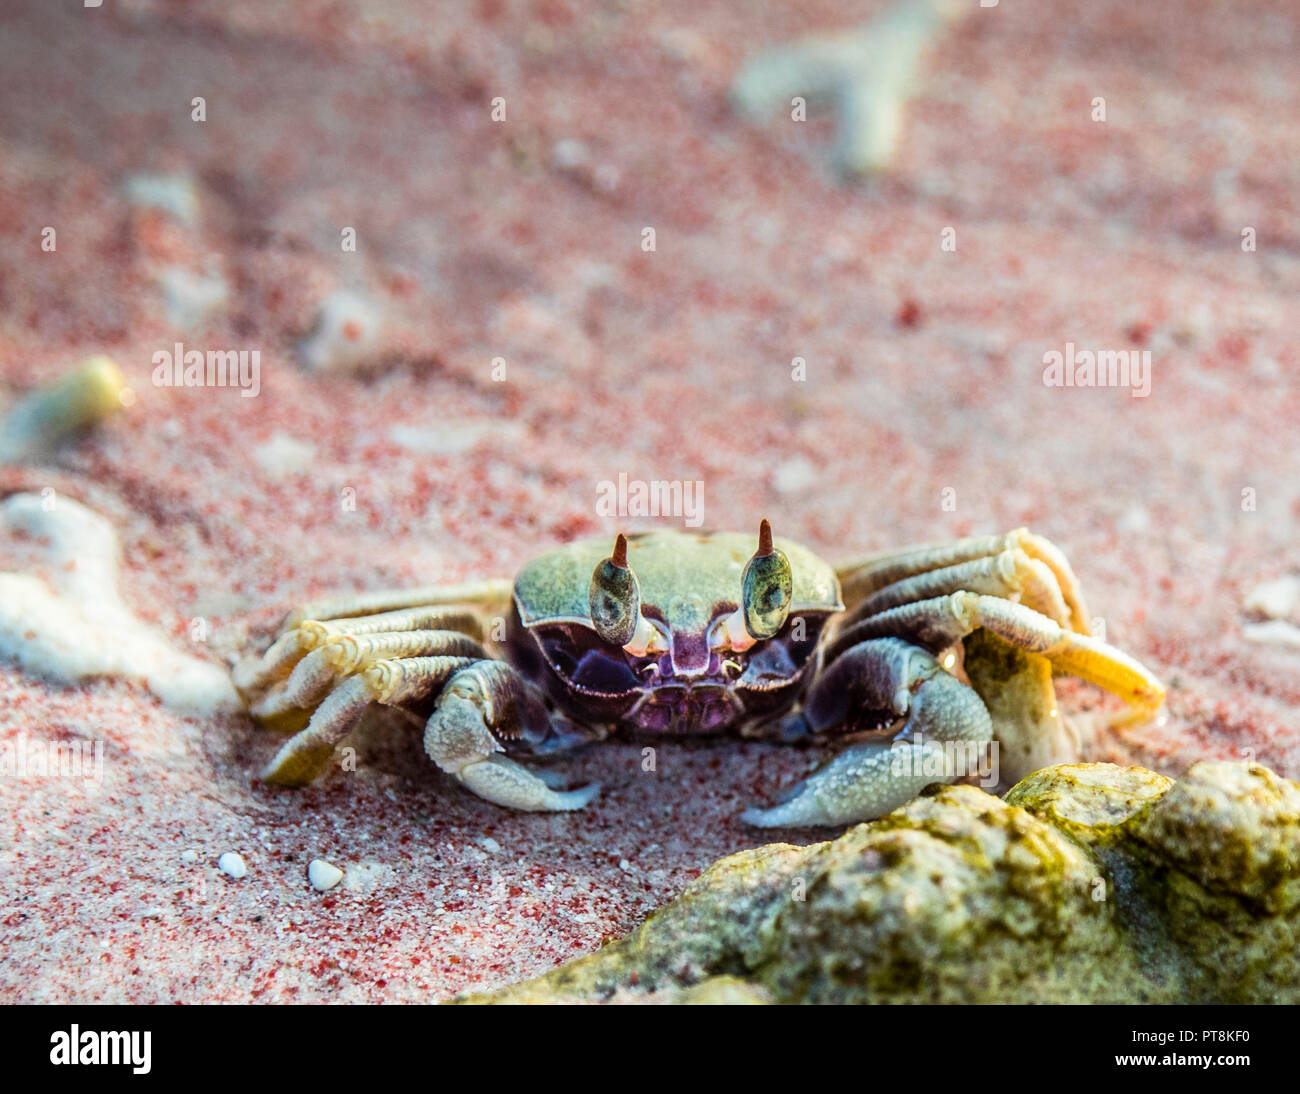 Crab on pink beach, Indonesia Stock Photo